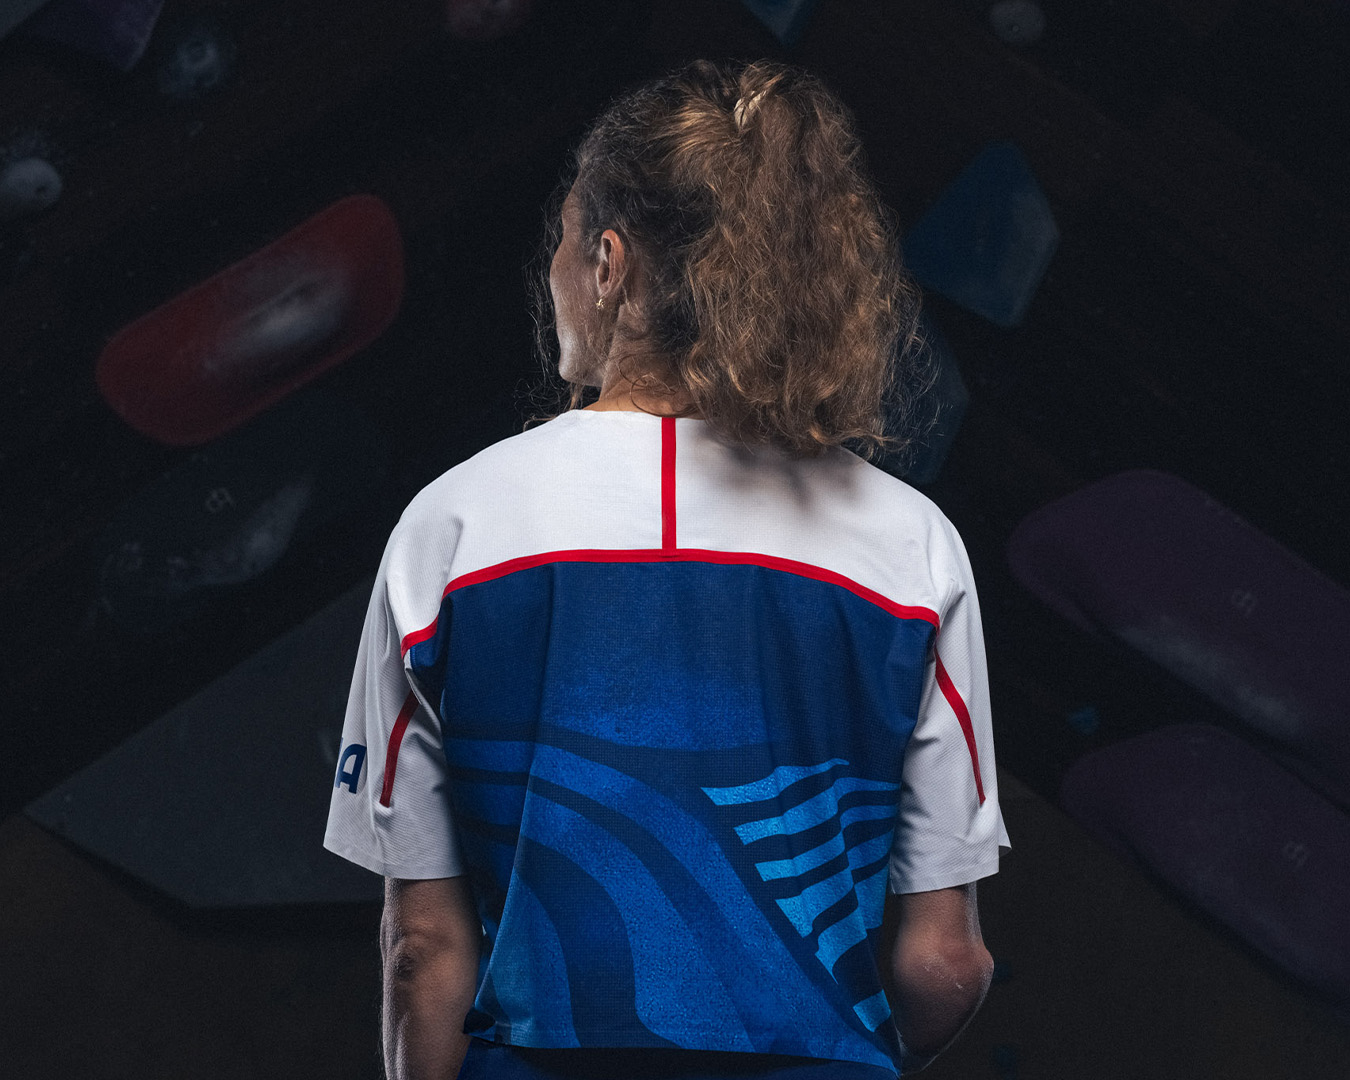 Person in a sports jersey with a ponytail standing in front of a climbing wall